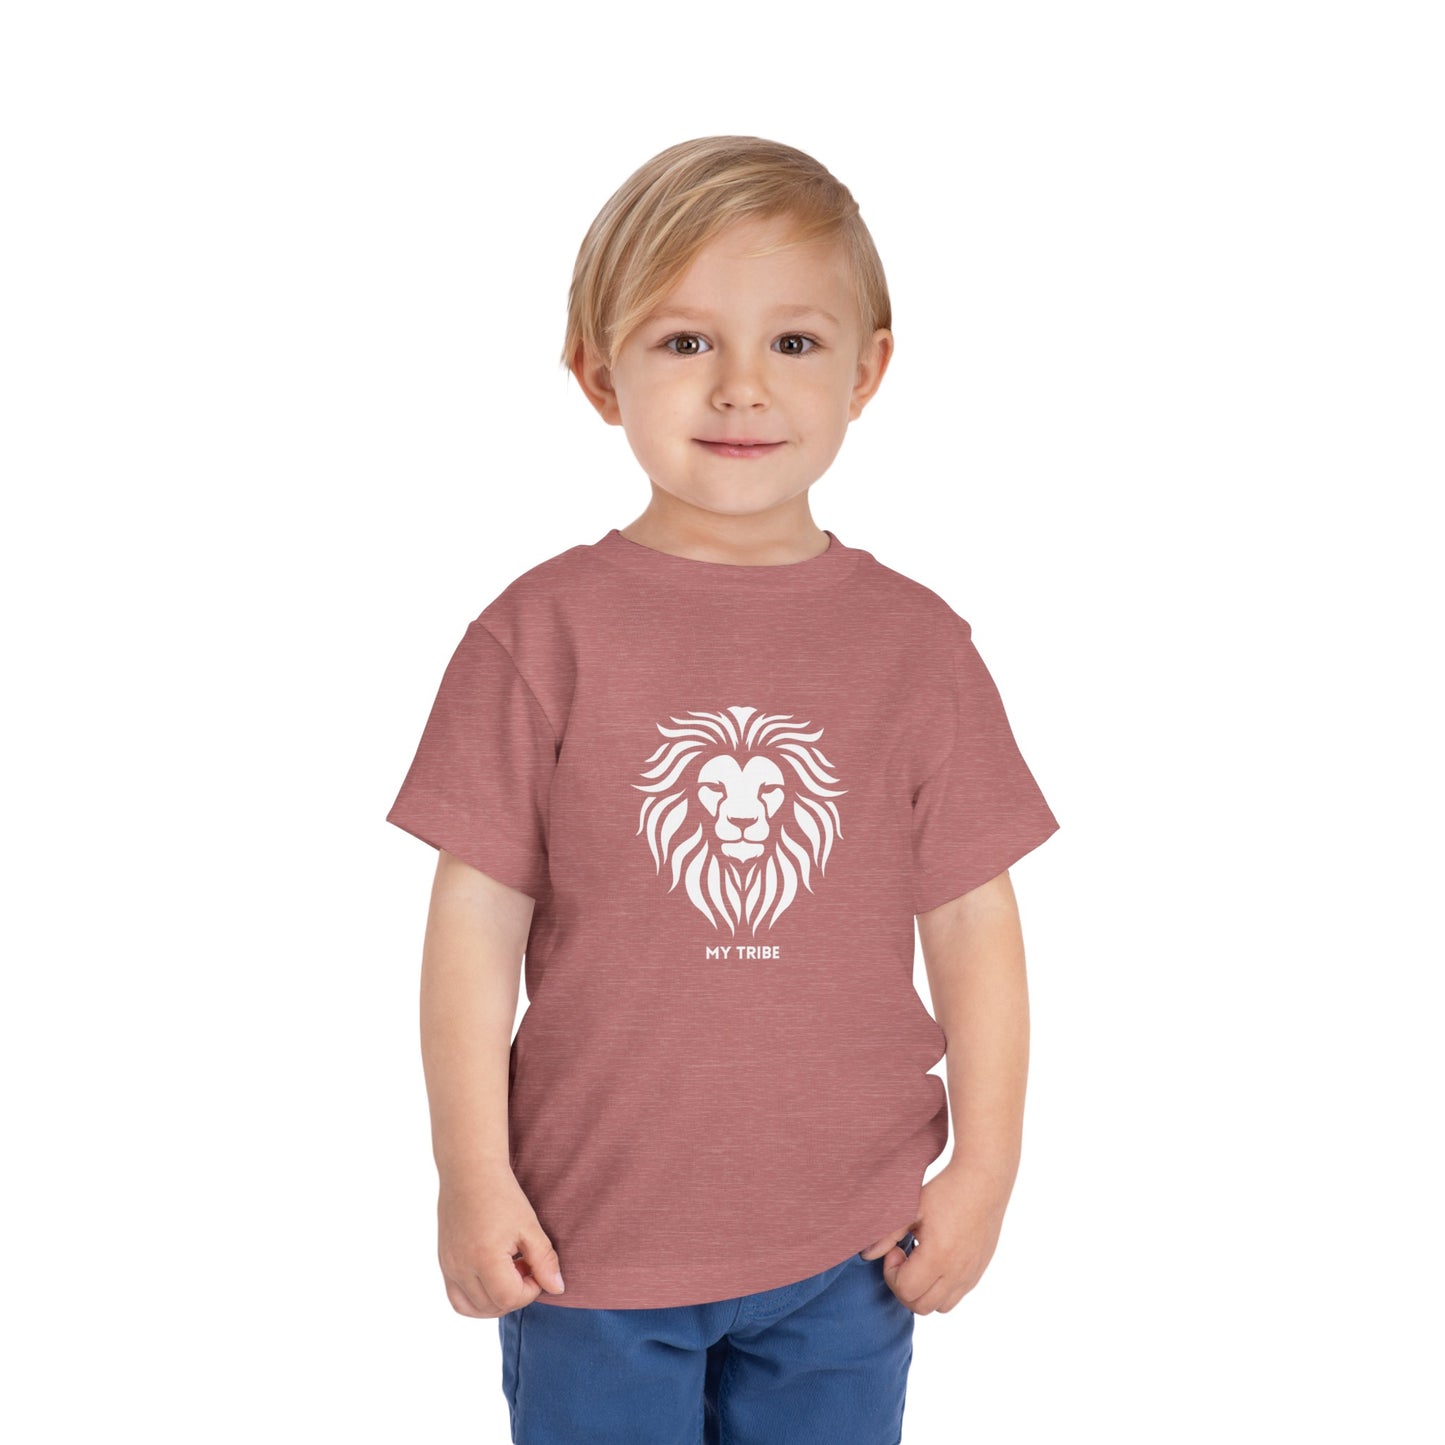 Toddler Lion My Tribe short sleeve t-shirt